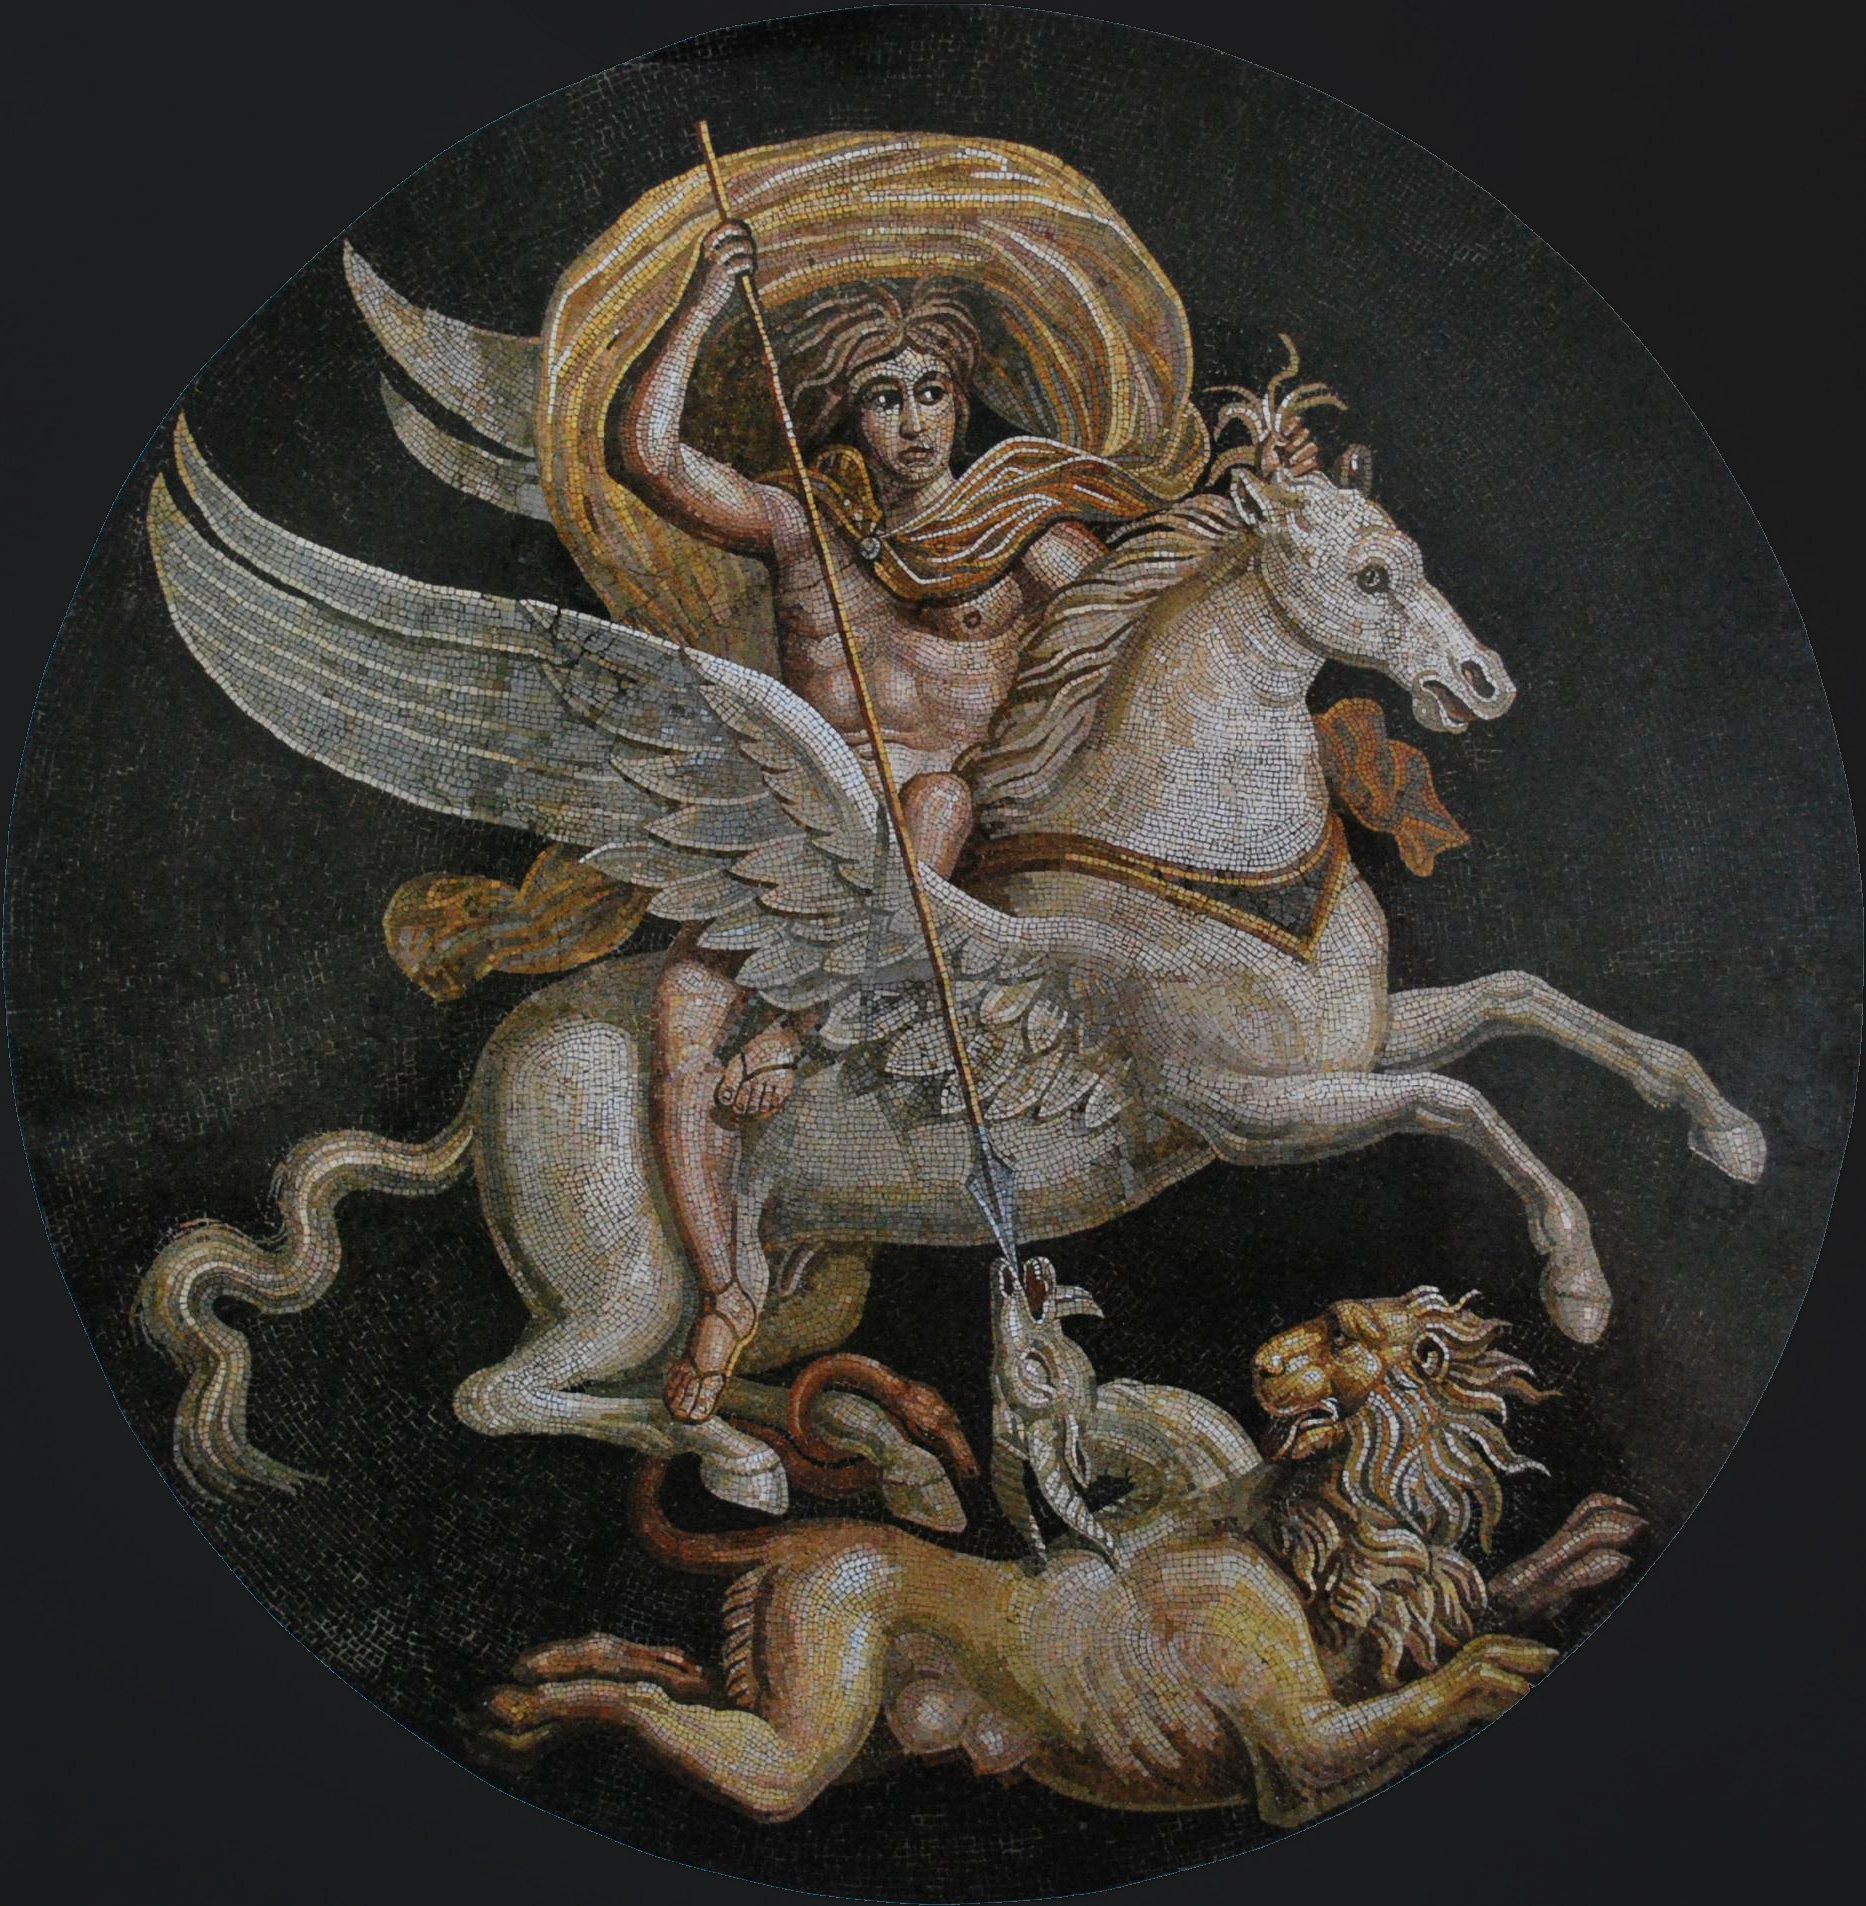 A mosaic depicting a man riding pegasus while carrying an arrow which points towards a lion and mountain goat.